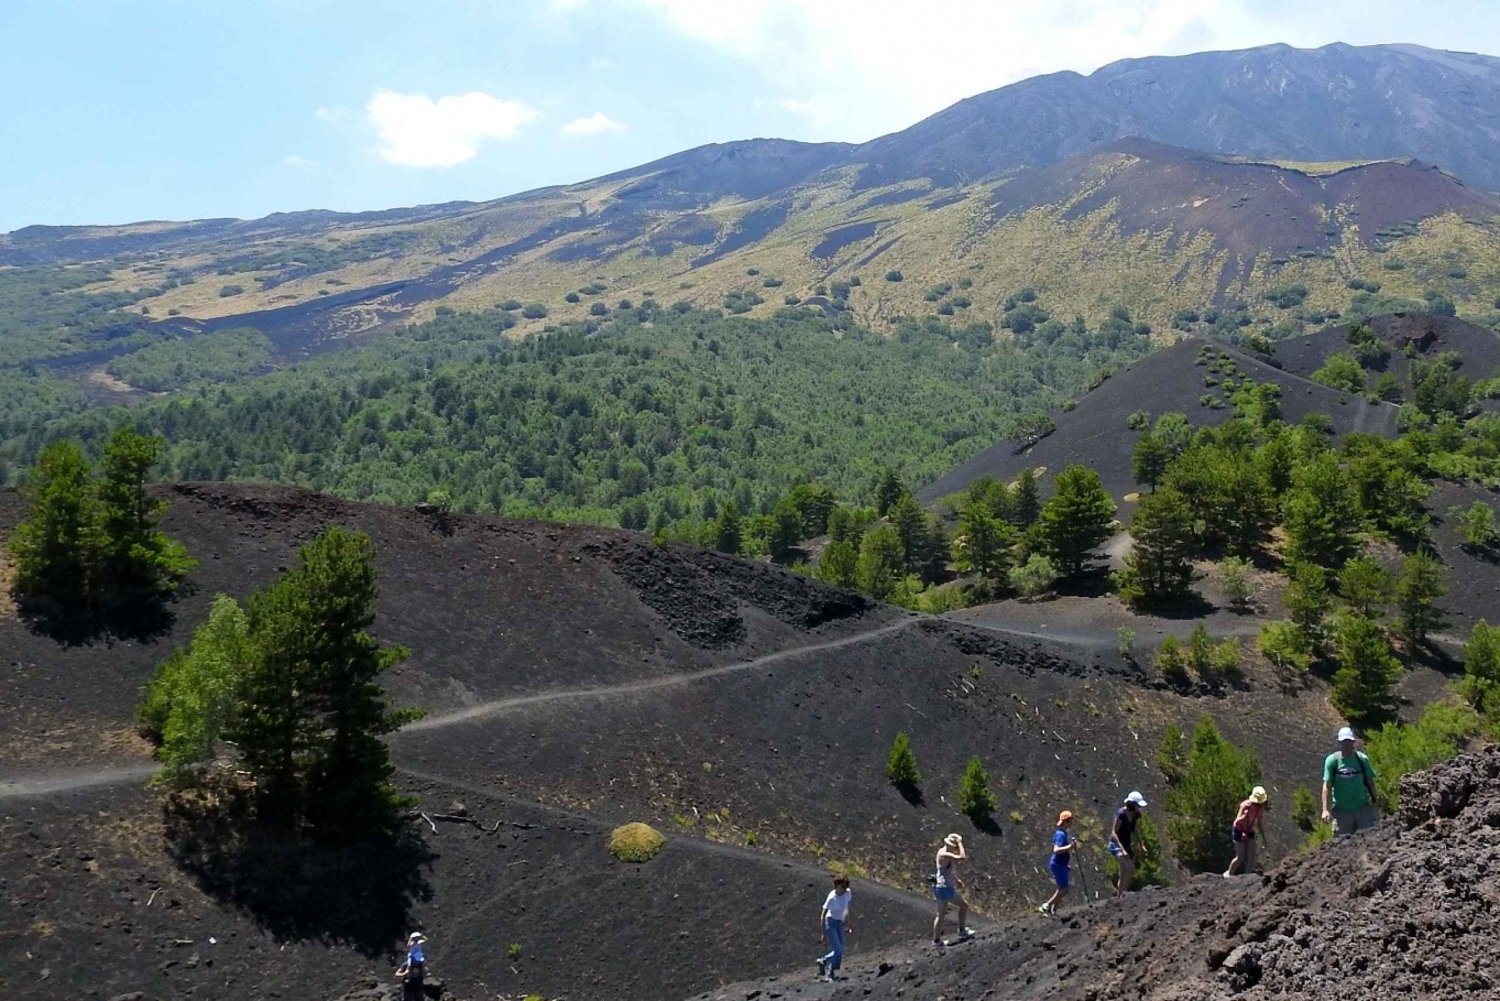 Taormina and Catania: Private Etna Exploration and Cave Tour